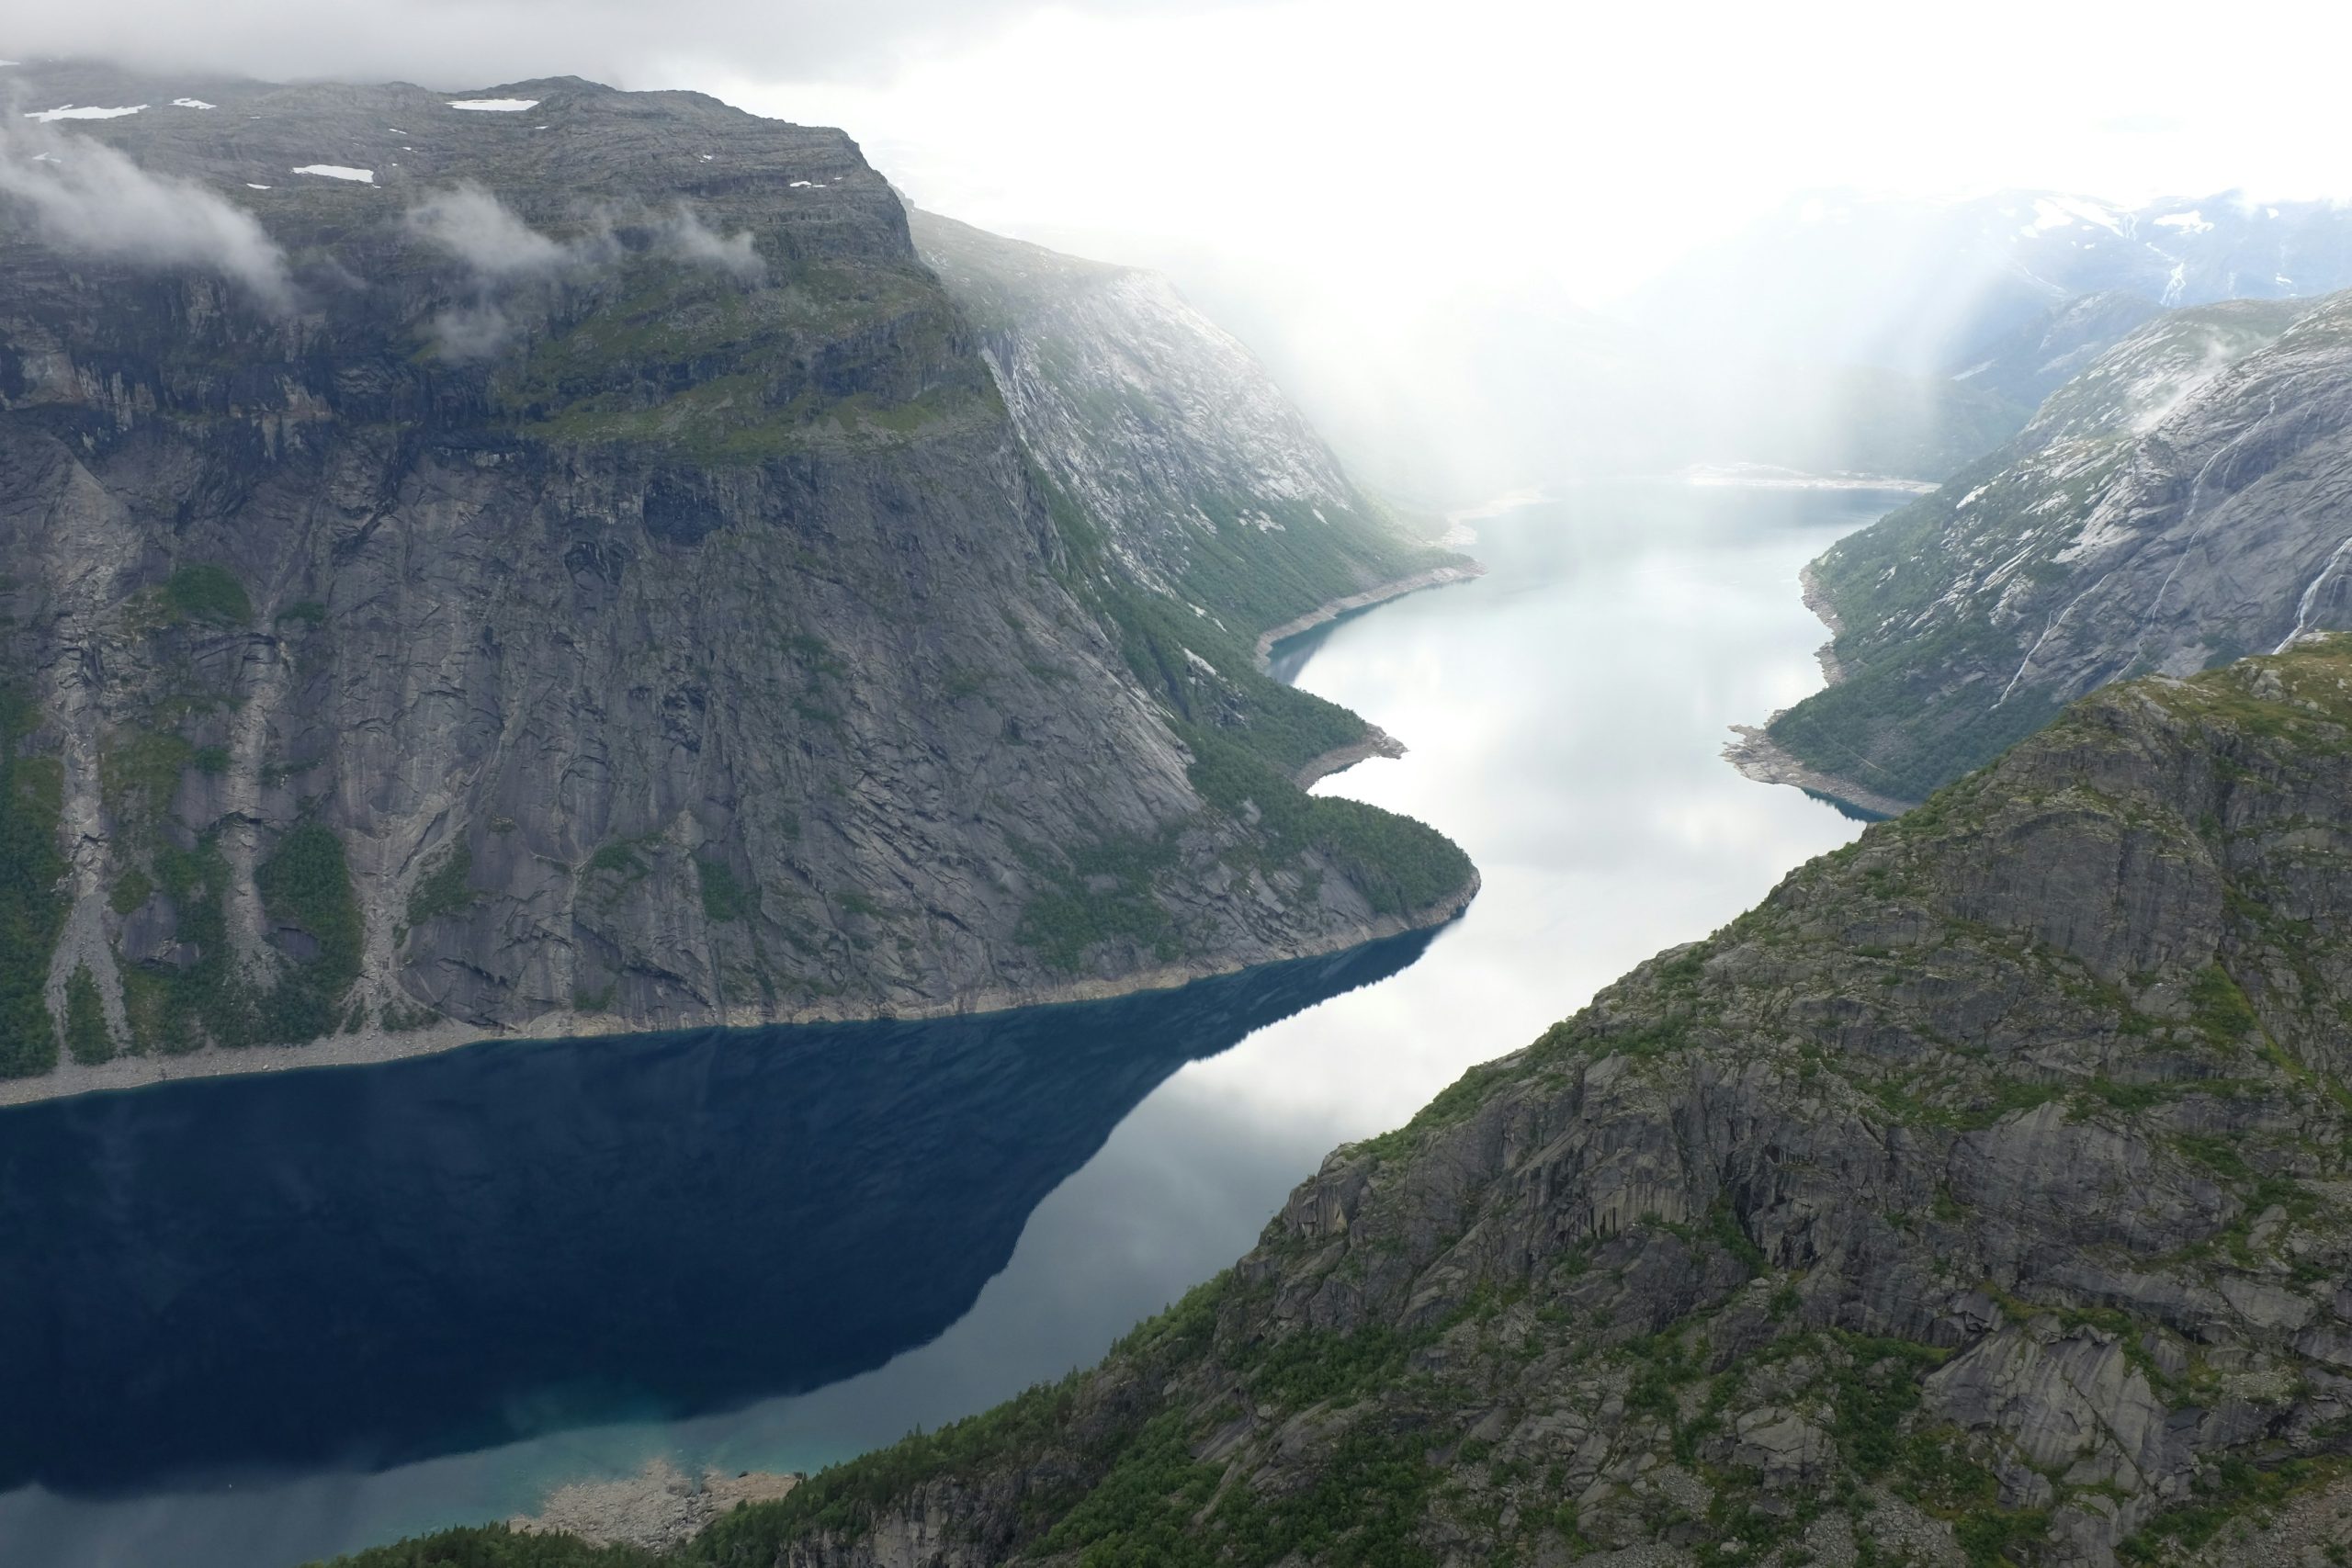 discover the breathtaking beauty of norway's fjords, where majestic cliffs meet the sparkling waters of the north atlantic. plan your once-in-a-lifetime adventure today!